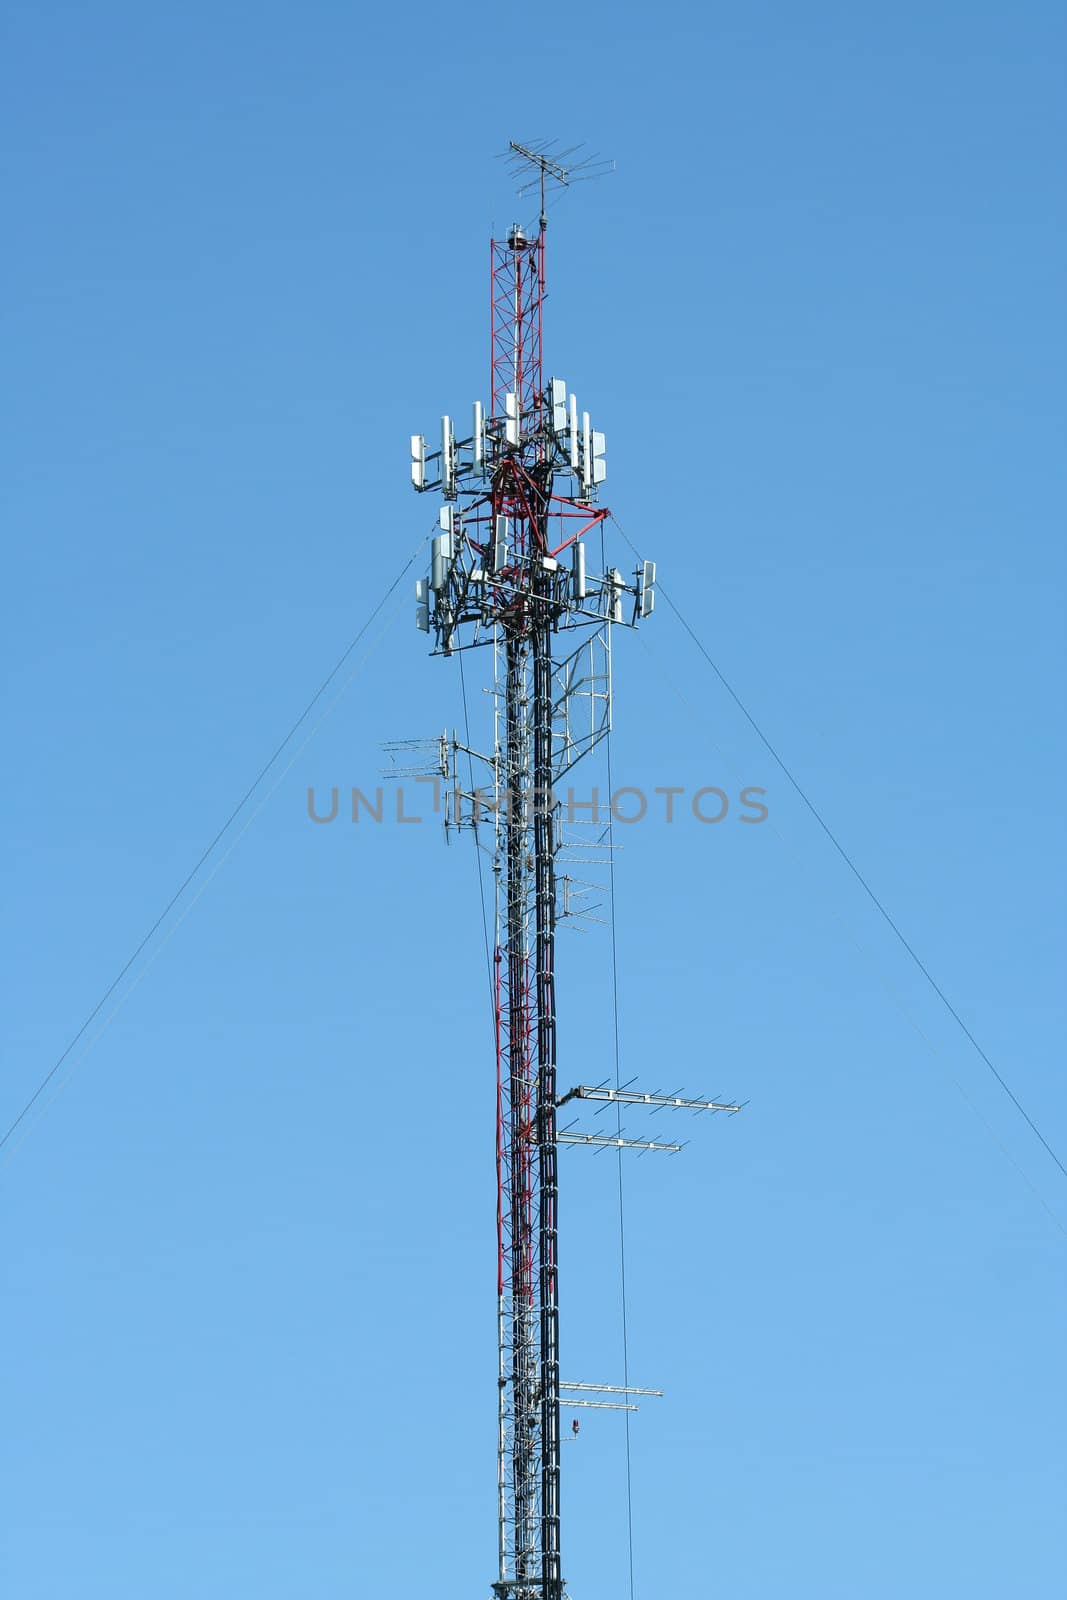 Cell Phone Tower by njnightsky